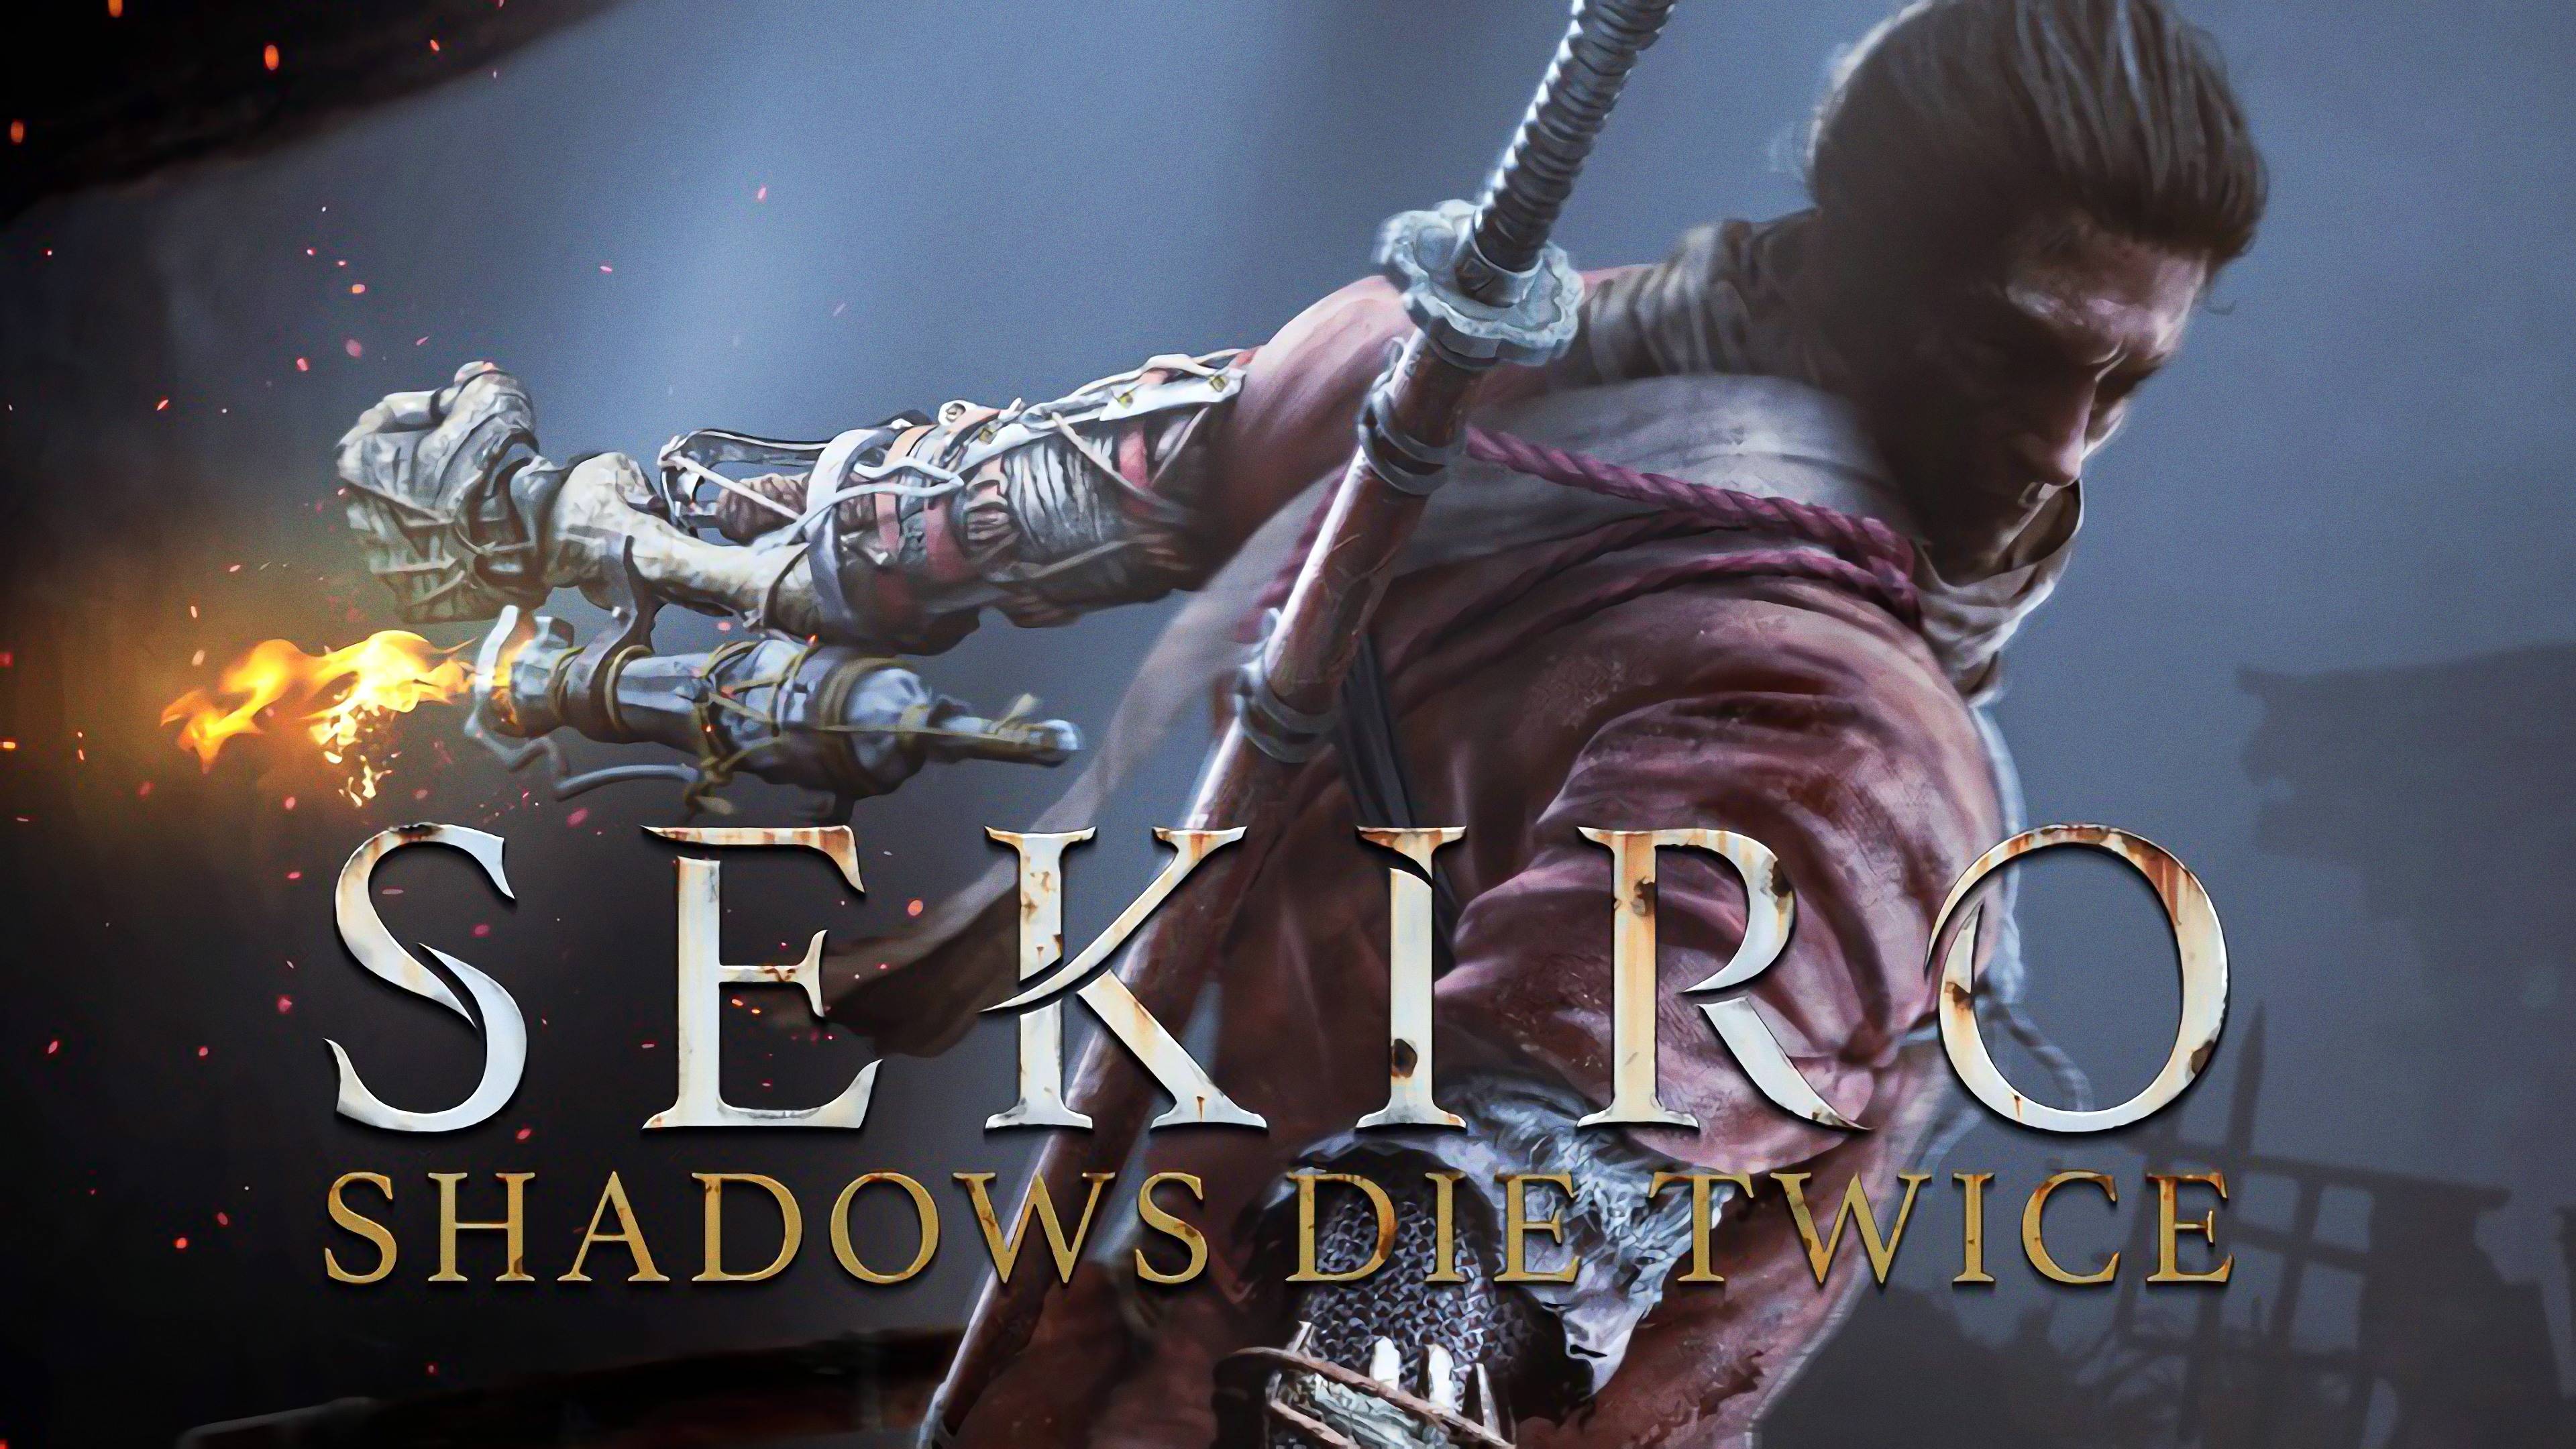 sekiro-shadows-die-twice-is-a-stealth-game-if-you-want-it-to-be-pcgamesn